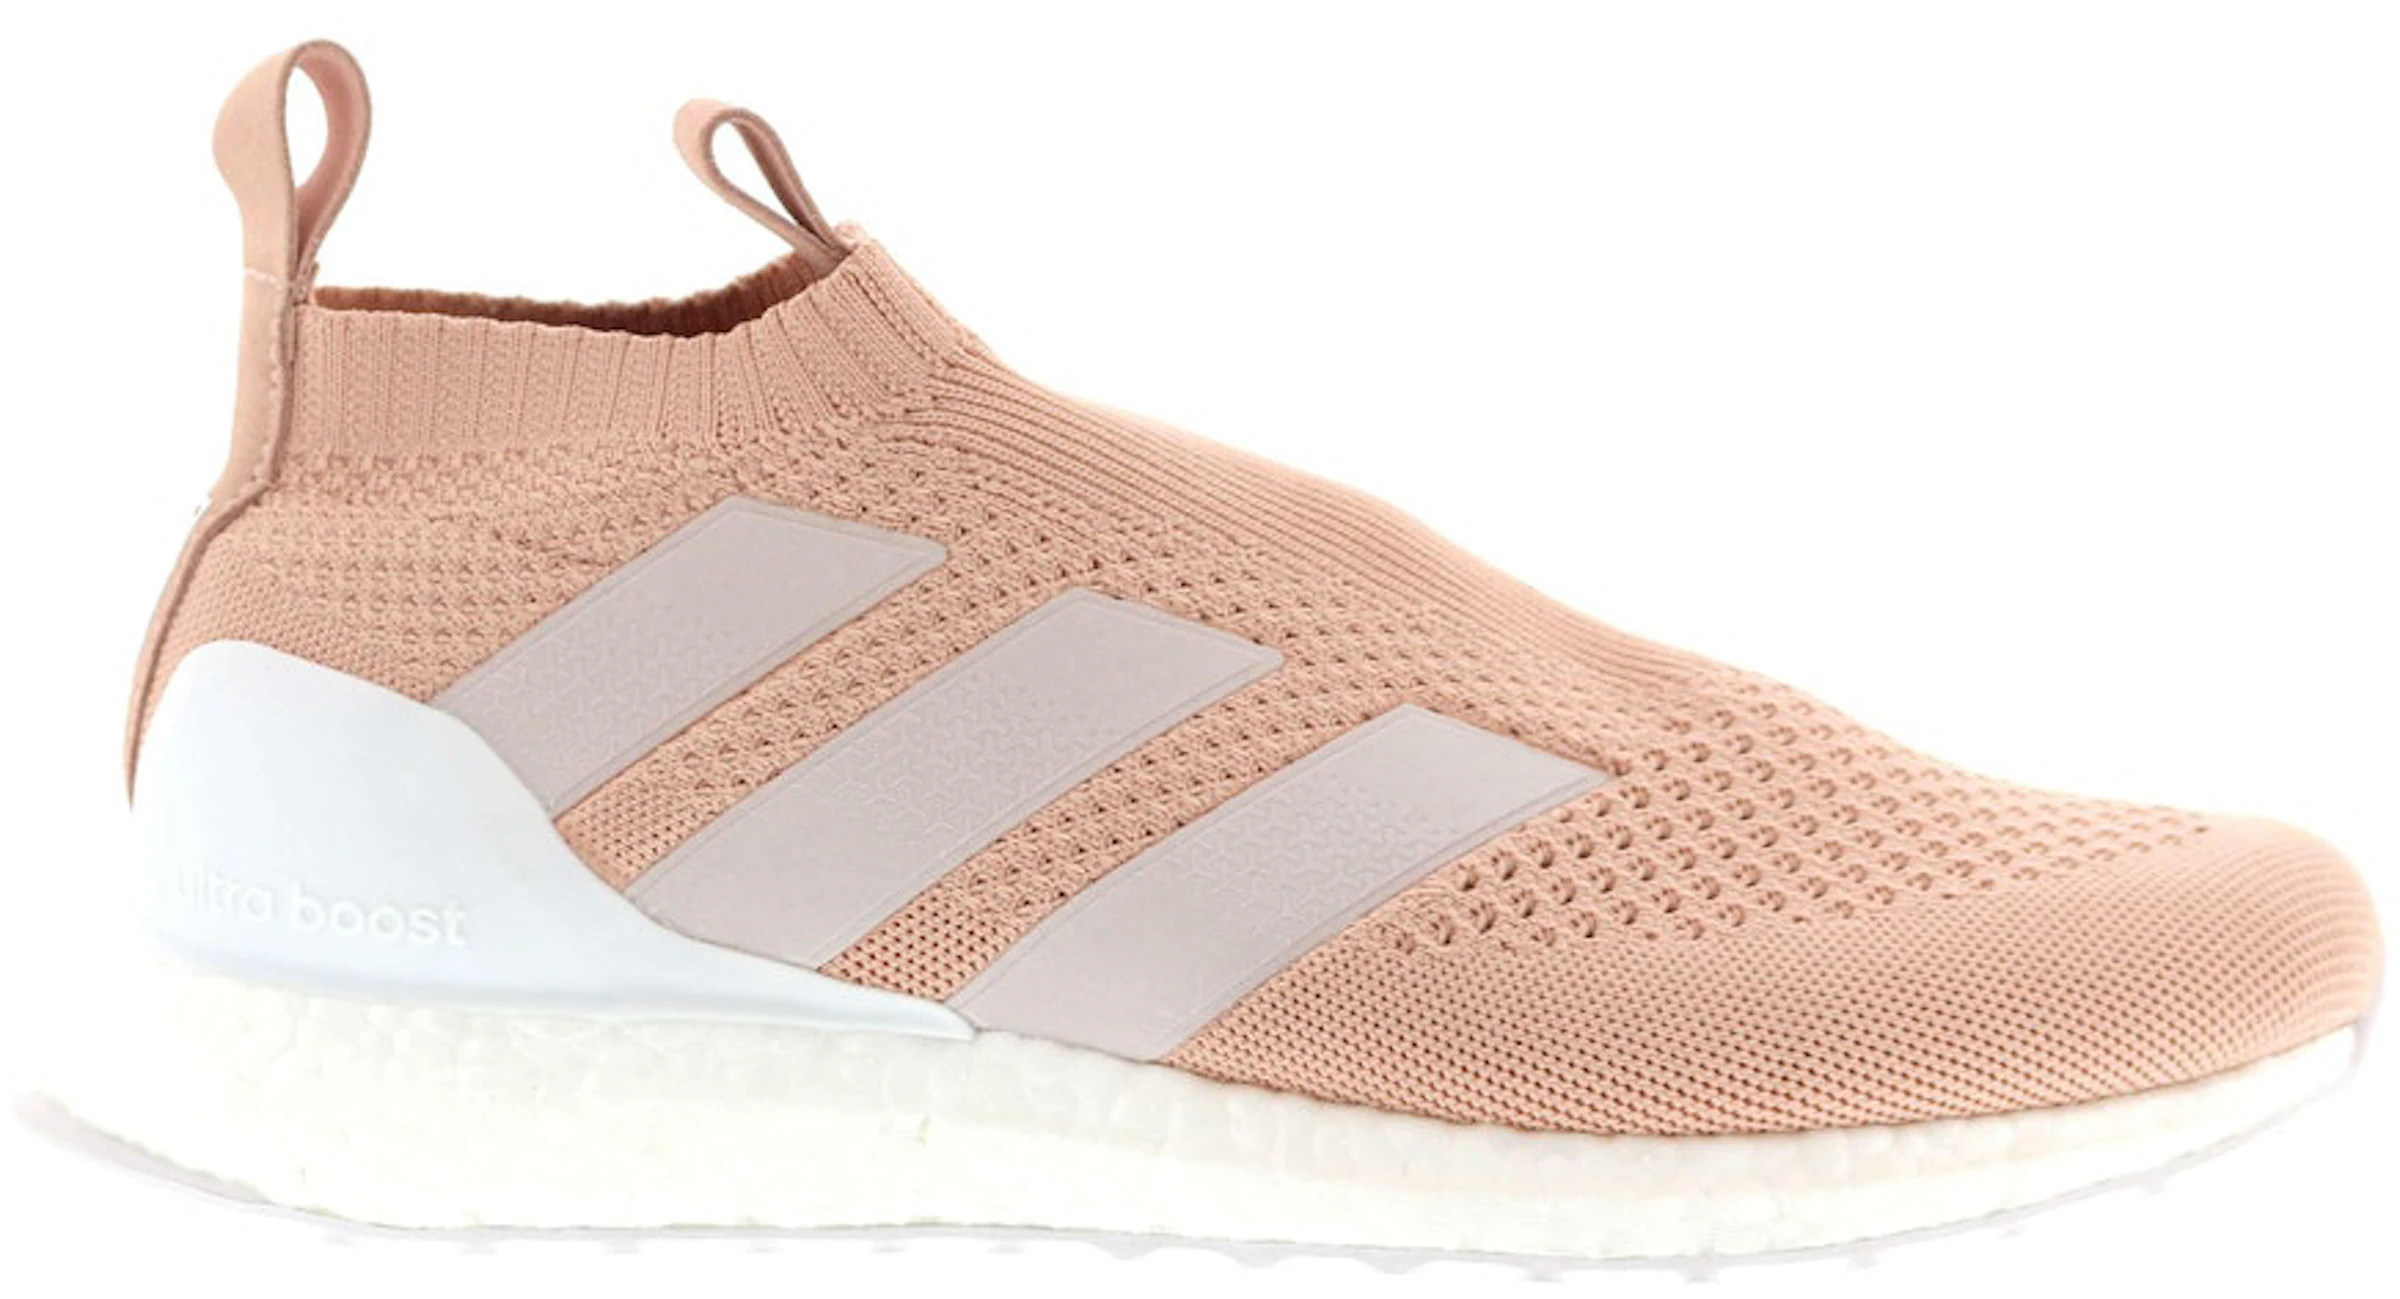 beton zuurgraad slachtoffer ACE 16 PureControl Ultra Boost Kith Flamingos - CM7890 - US